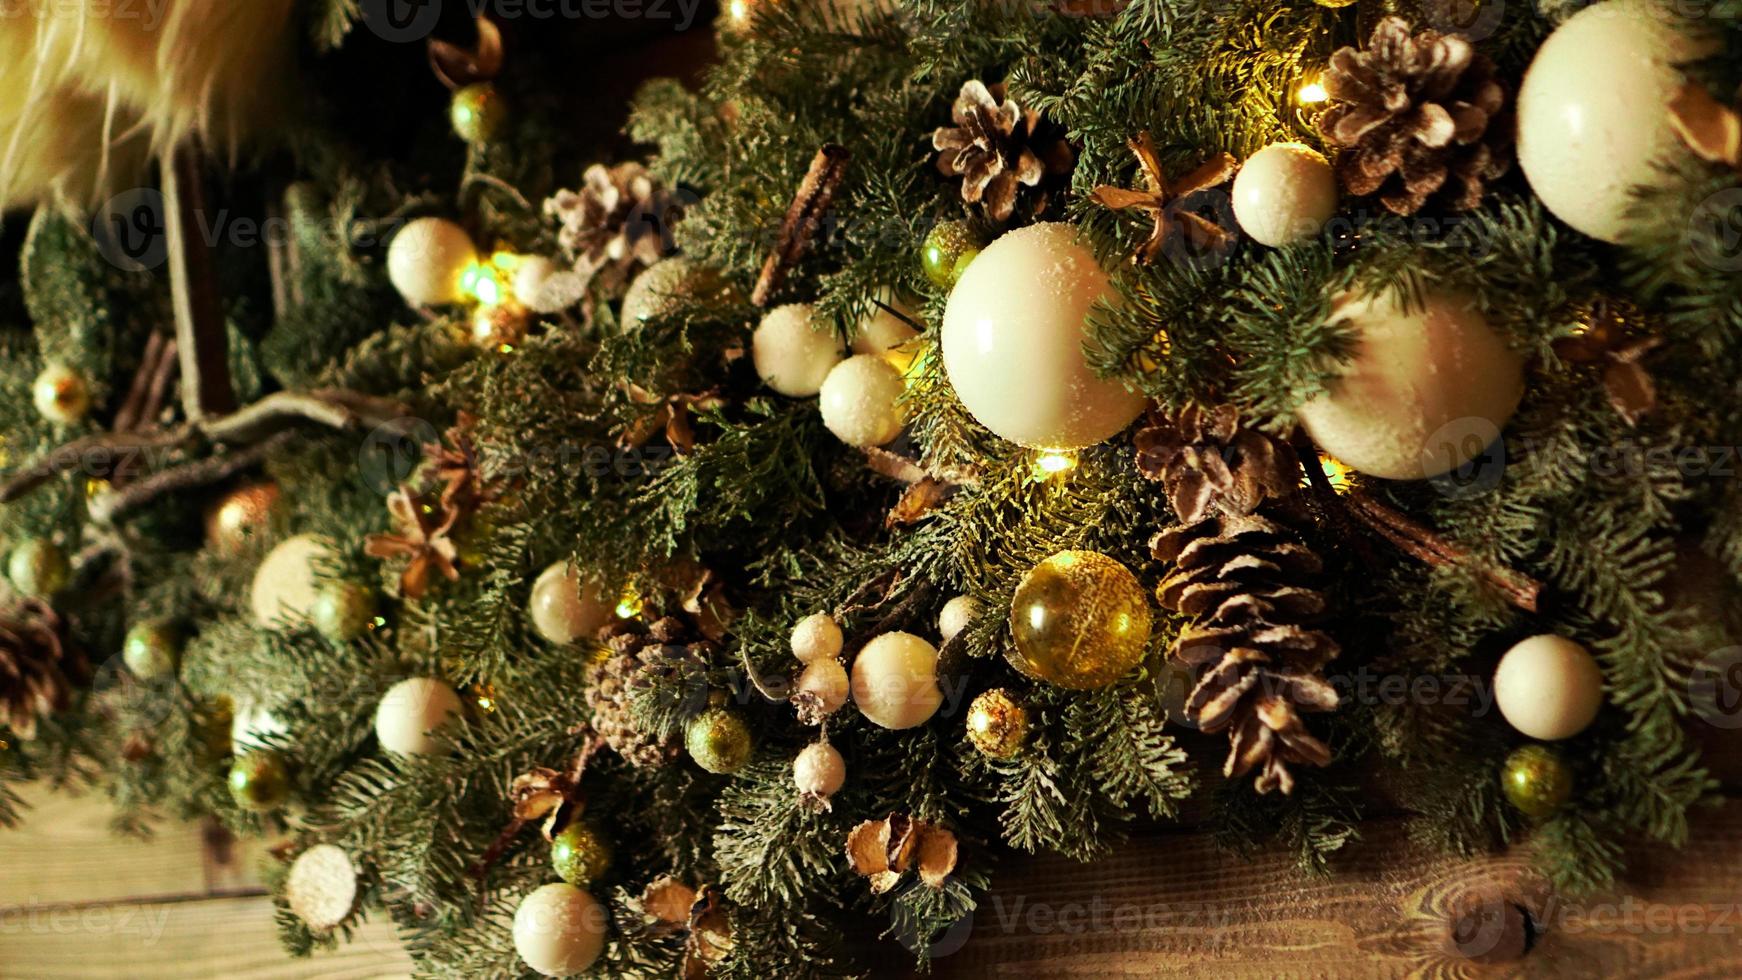 Christmas decorations, Christmas tree, gifts, new year photo